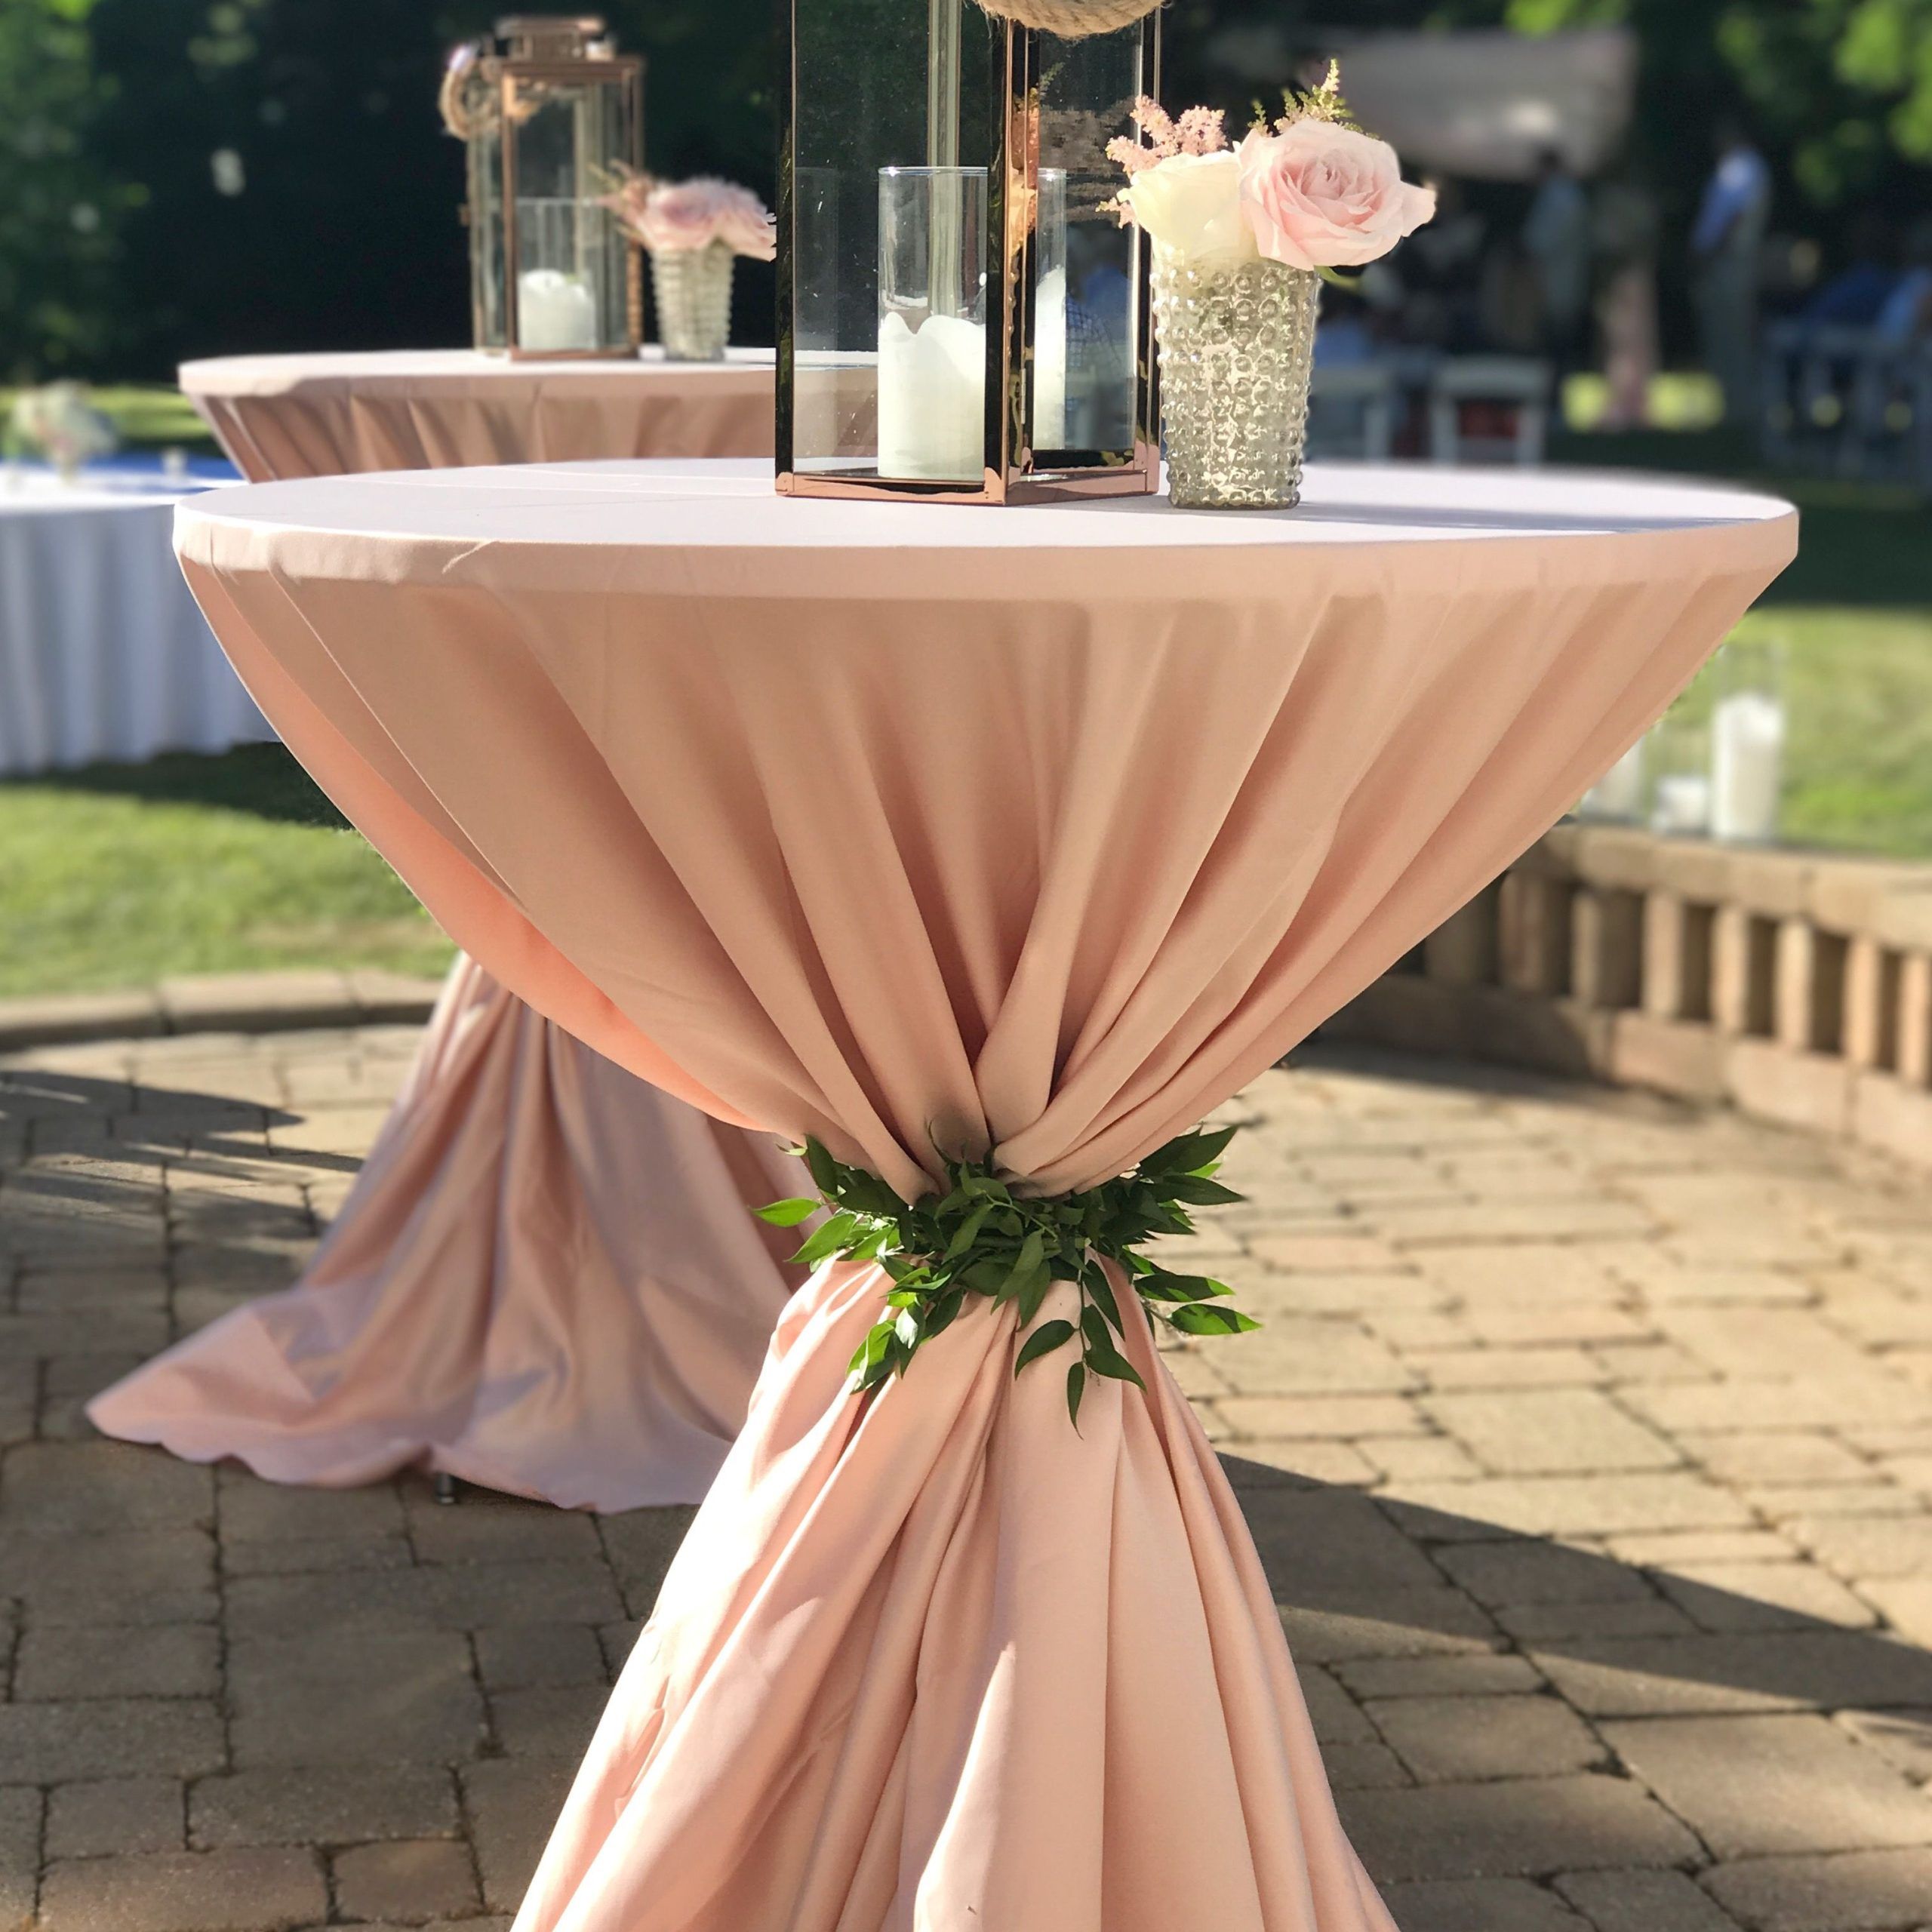 10+ Outdoor Party Table Decor Throughout Natural Outdoor Cocktail Tables (View 16 of 20)